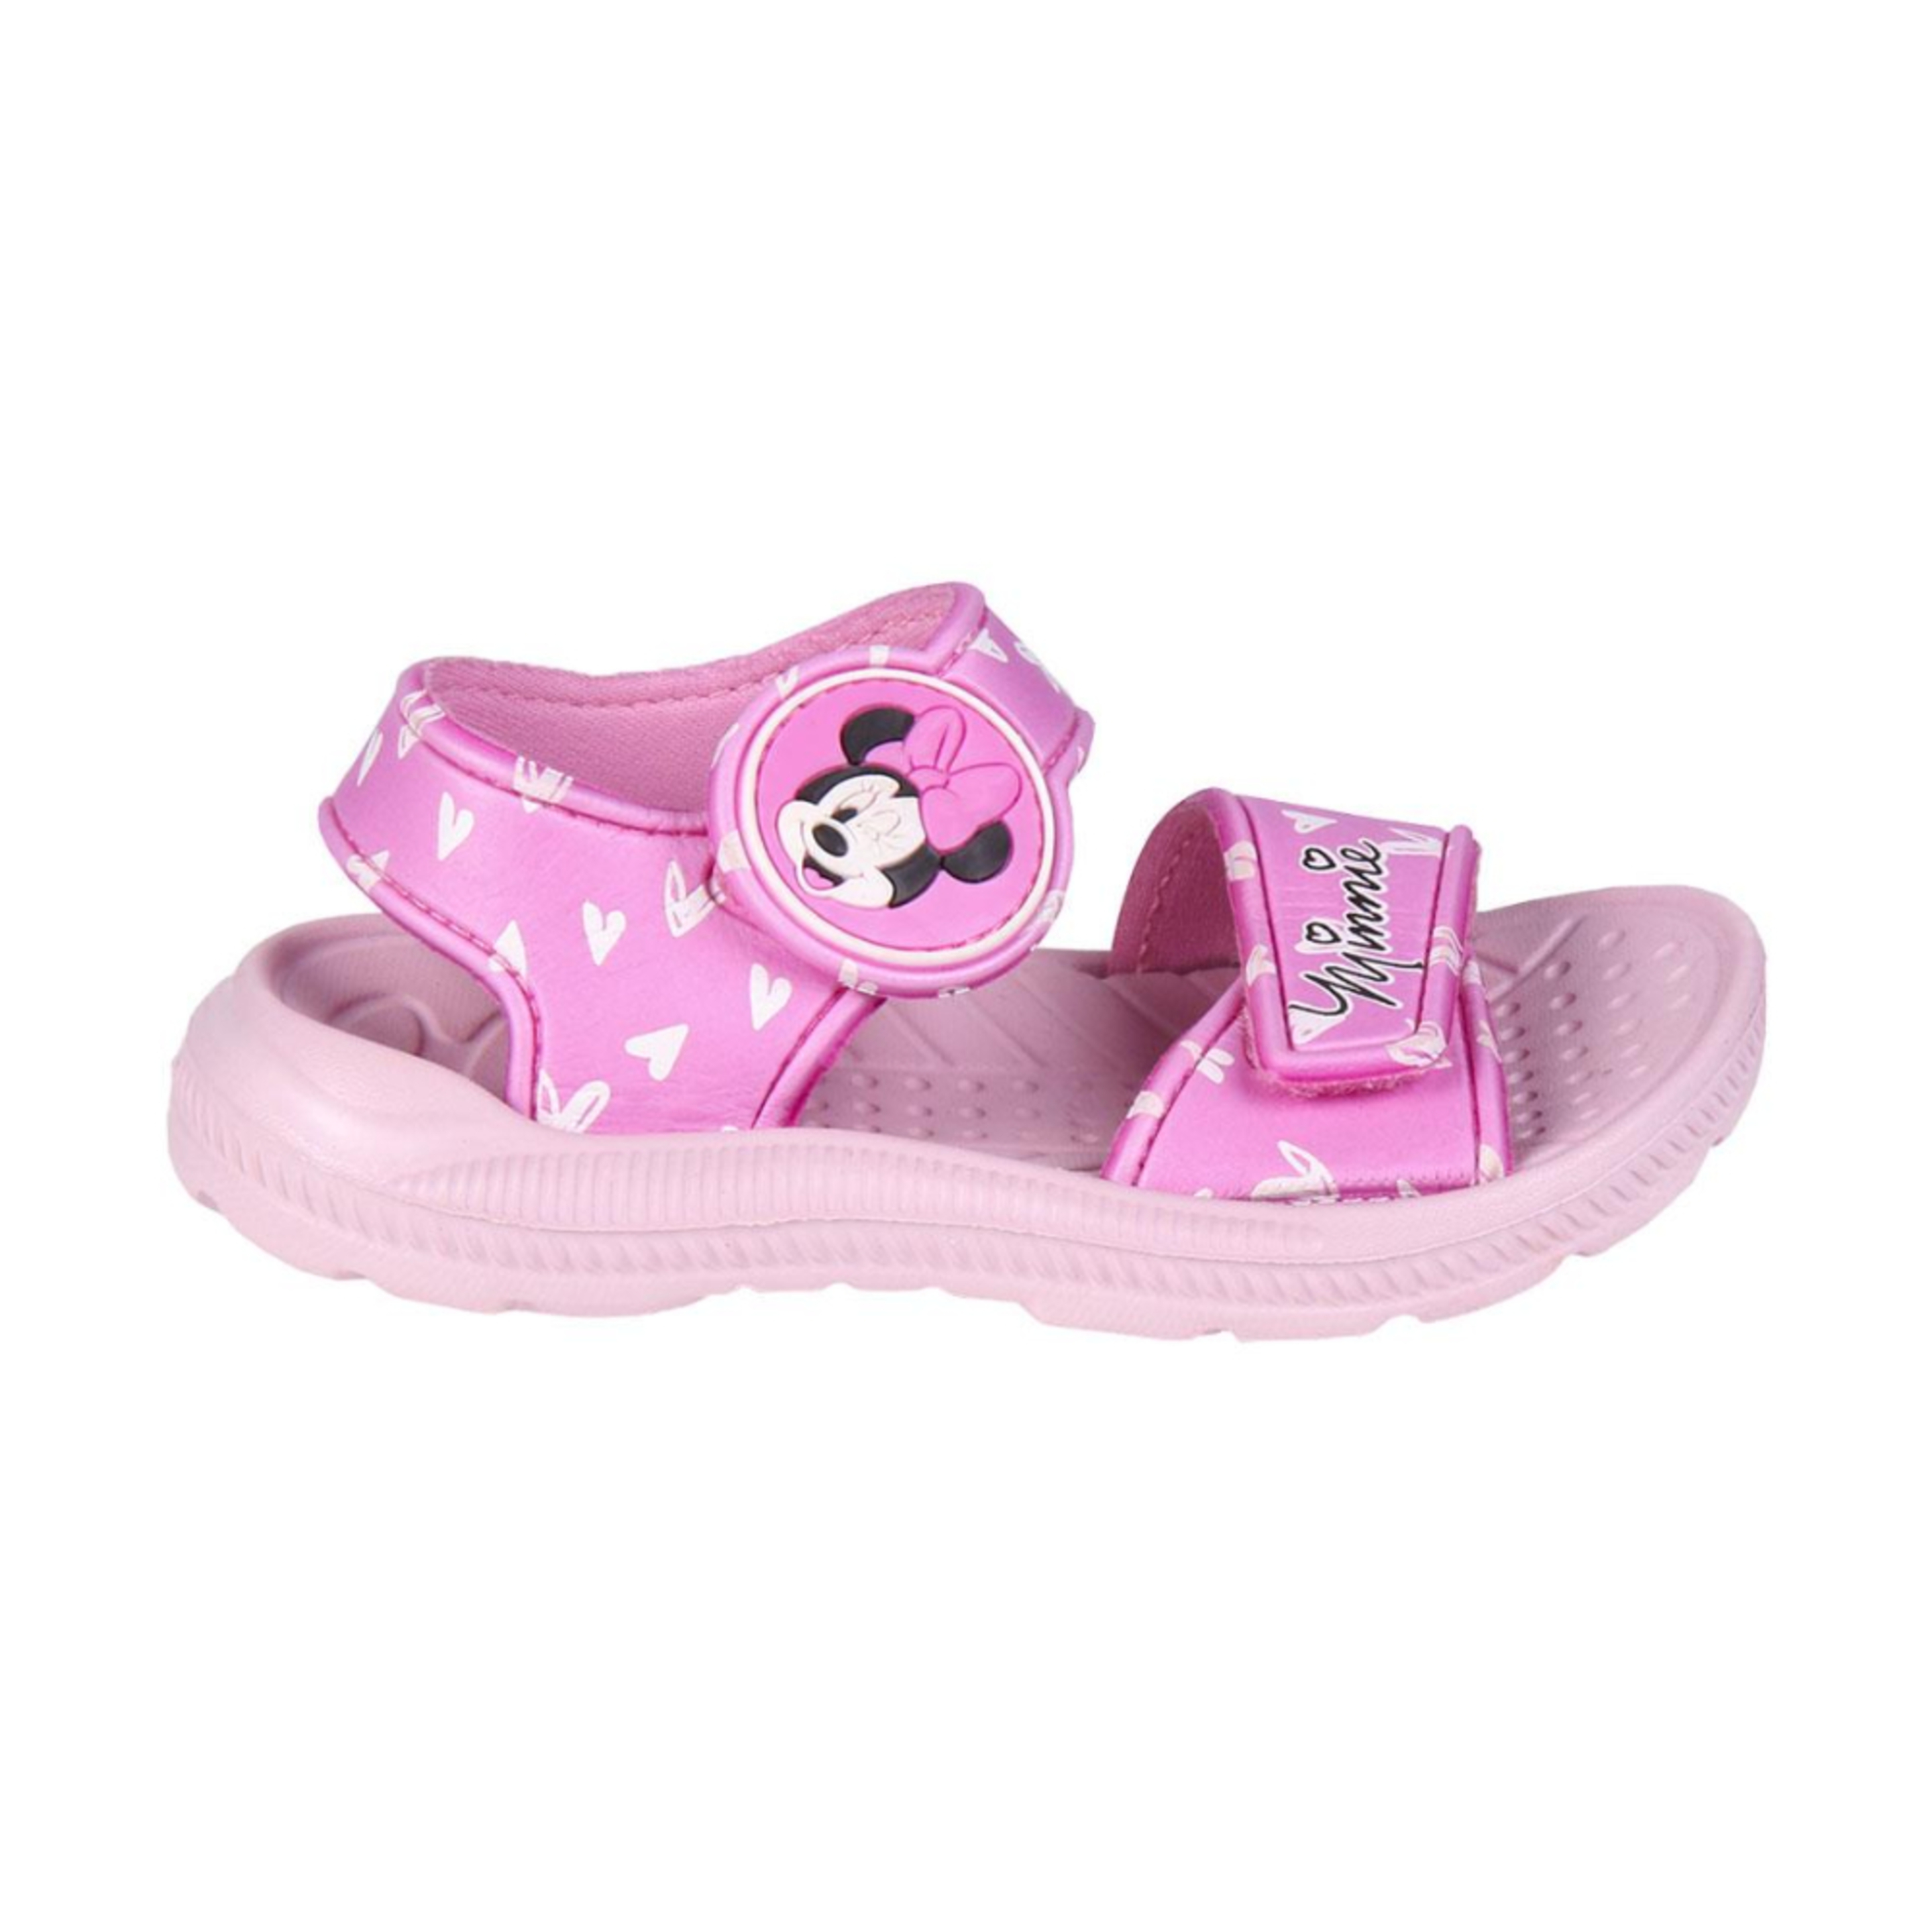 Minnie Mouse Sandals 71485 - Rosa | Sport Zone MKP